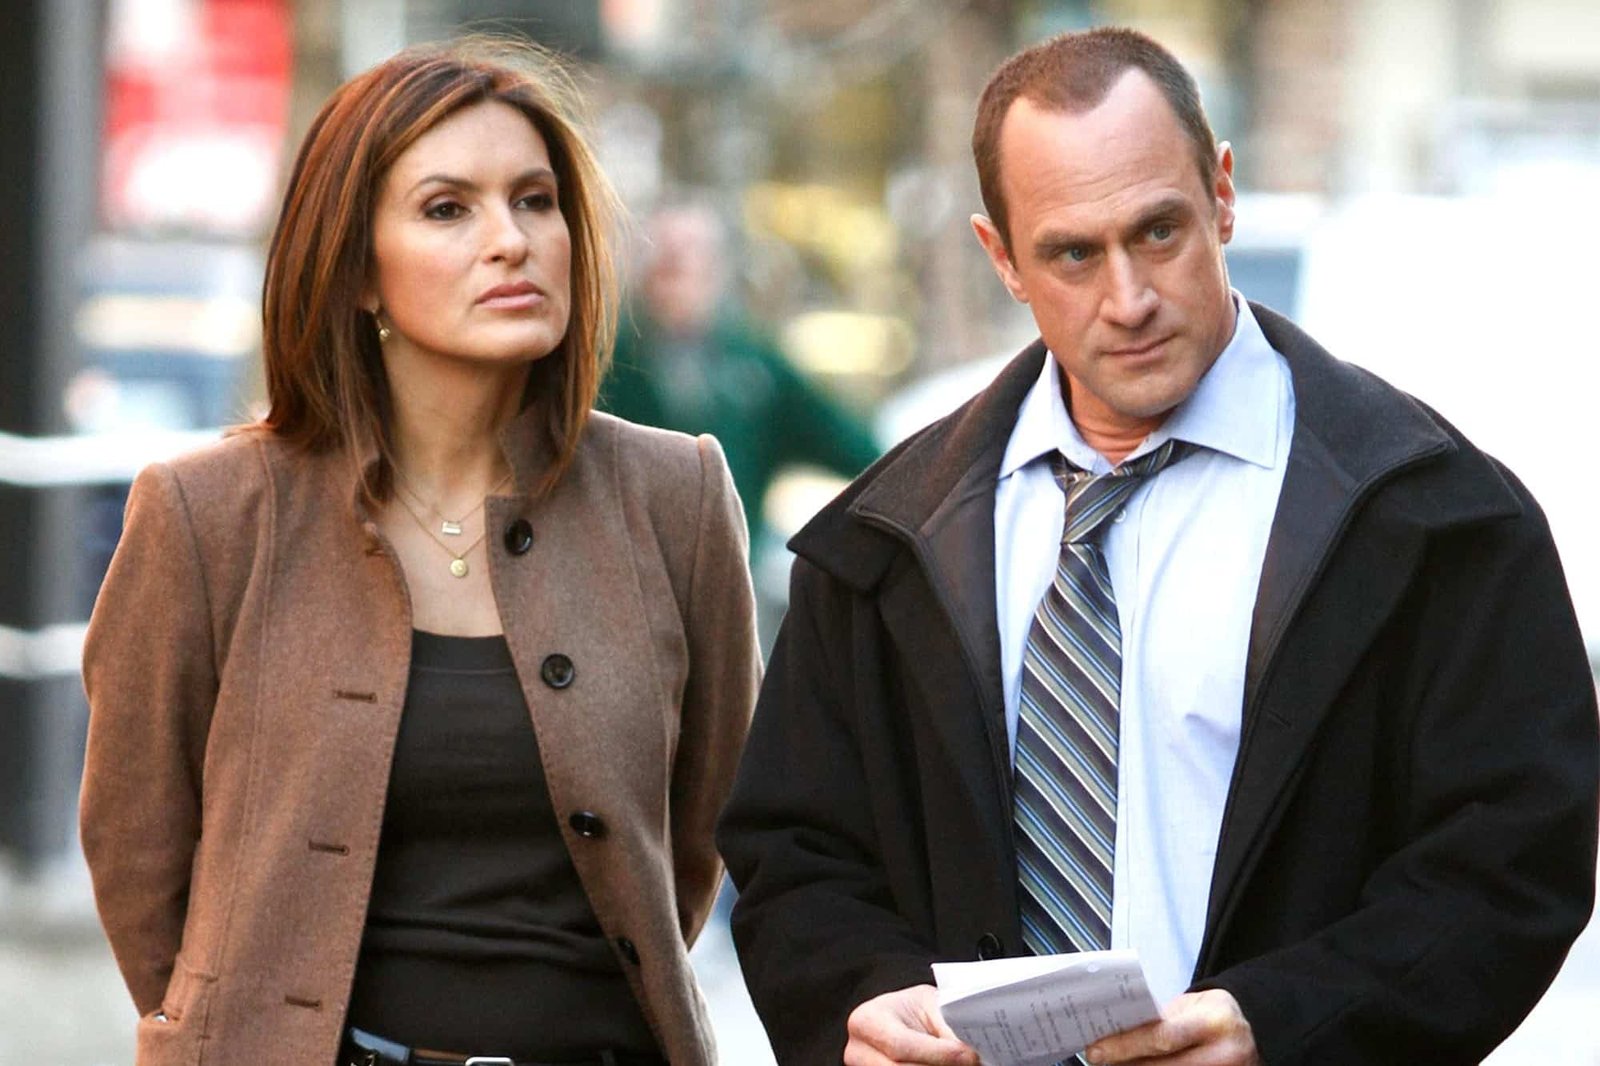 Law and Order Organized Crime Season 3 Release Date